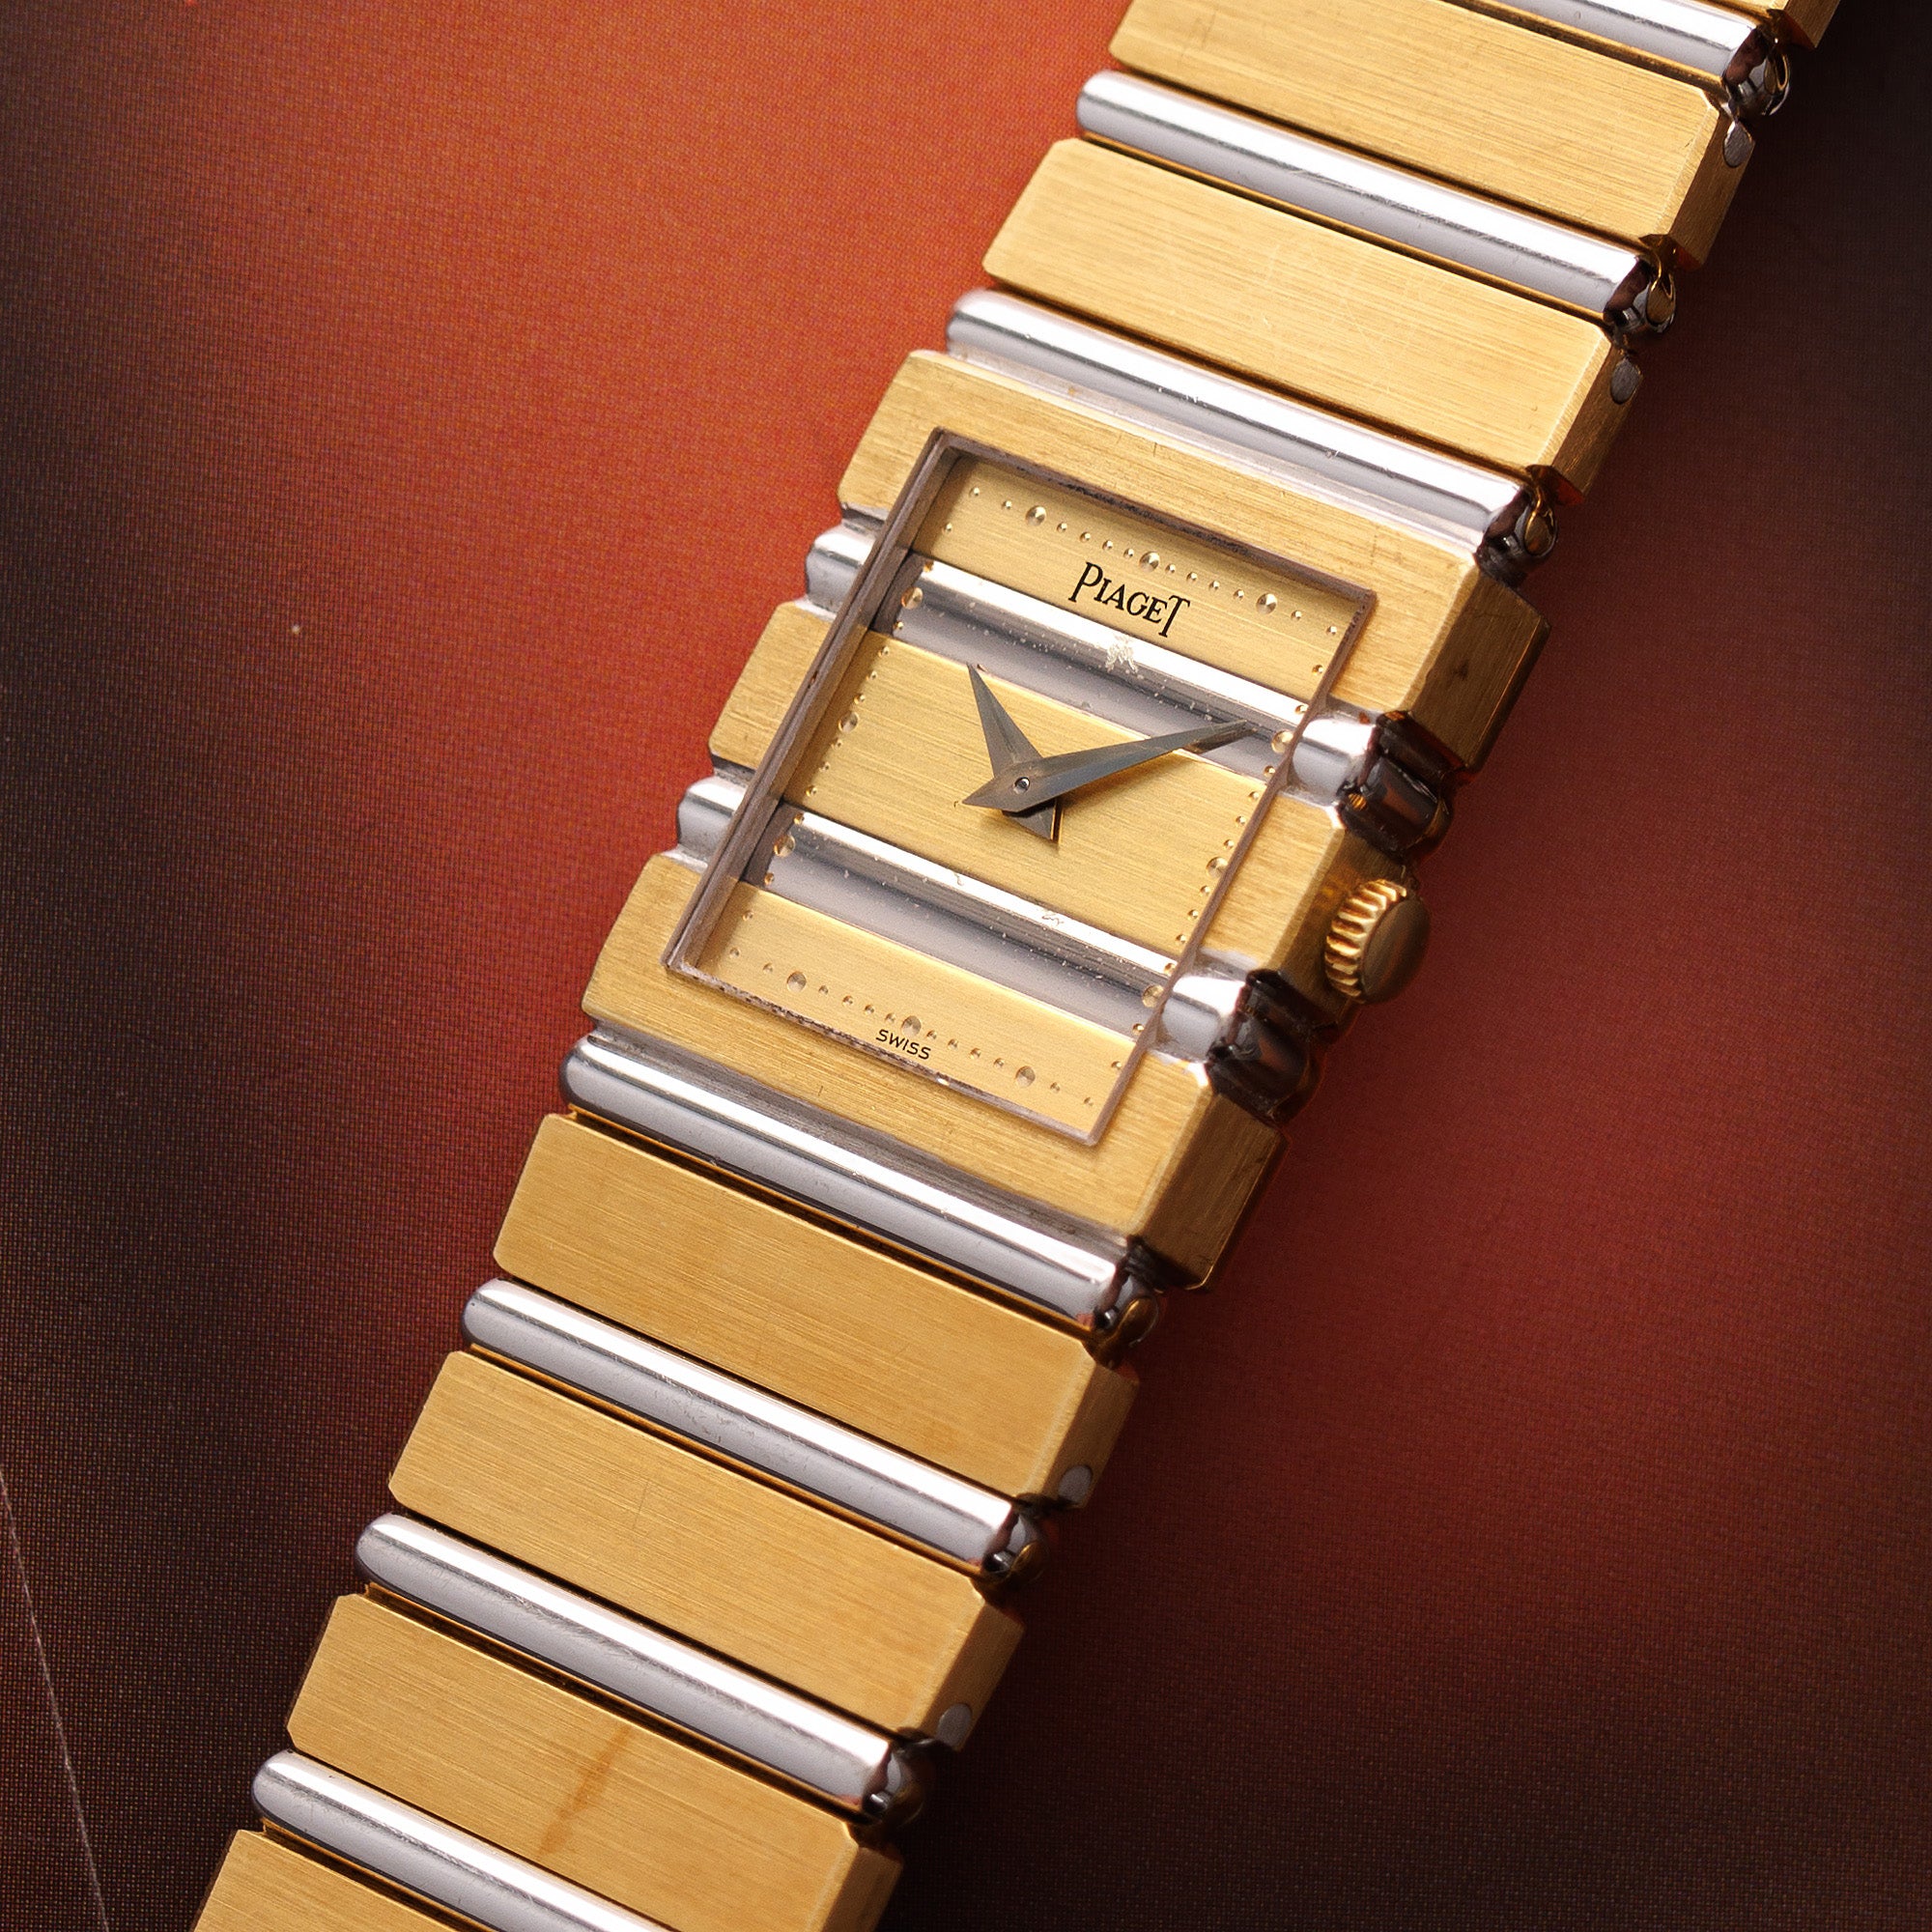 Piaget - Piaget Yellow & White Gold Polo Watch Ref. 8131 - The Keystone Watches